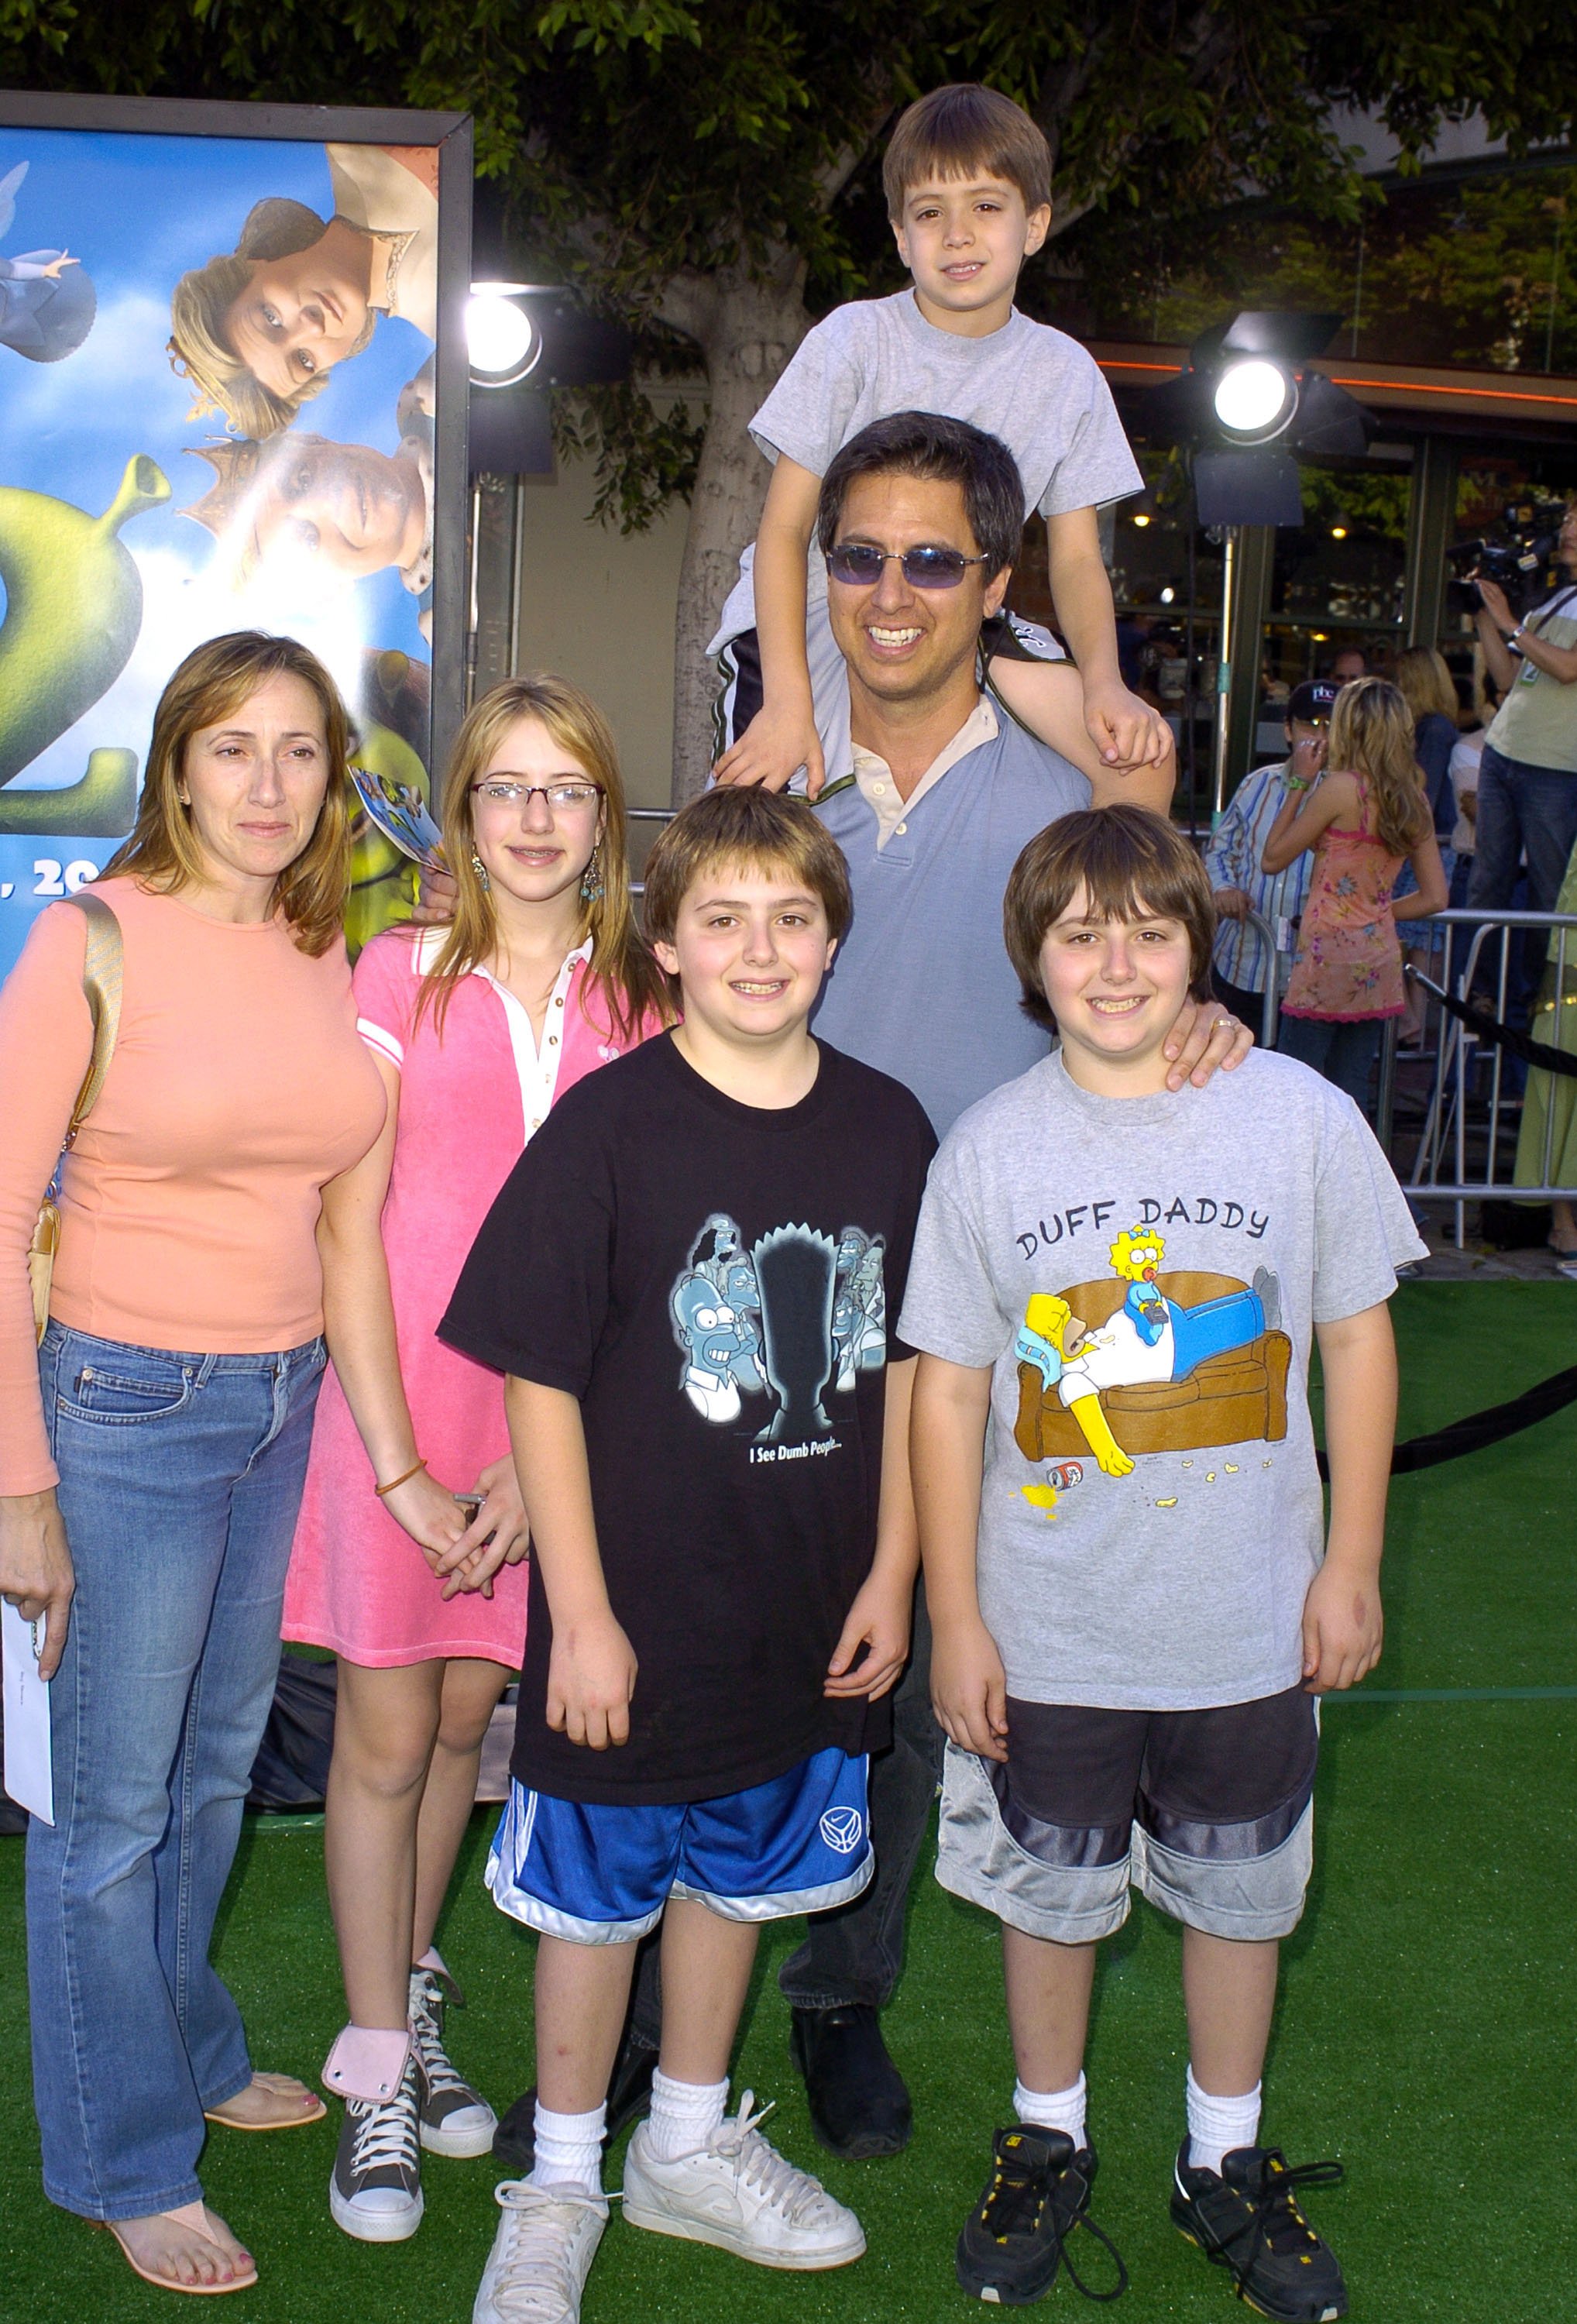 Ray Romano and family during the Los Angeles premiere of "Shrek 2" at Mann Village Theatre in Westwood, California | Source: Getty Images